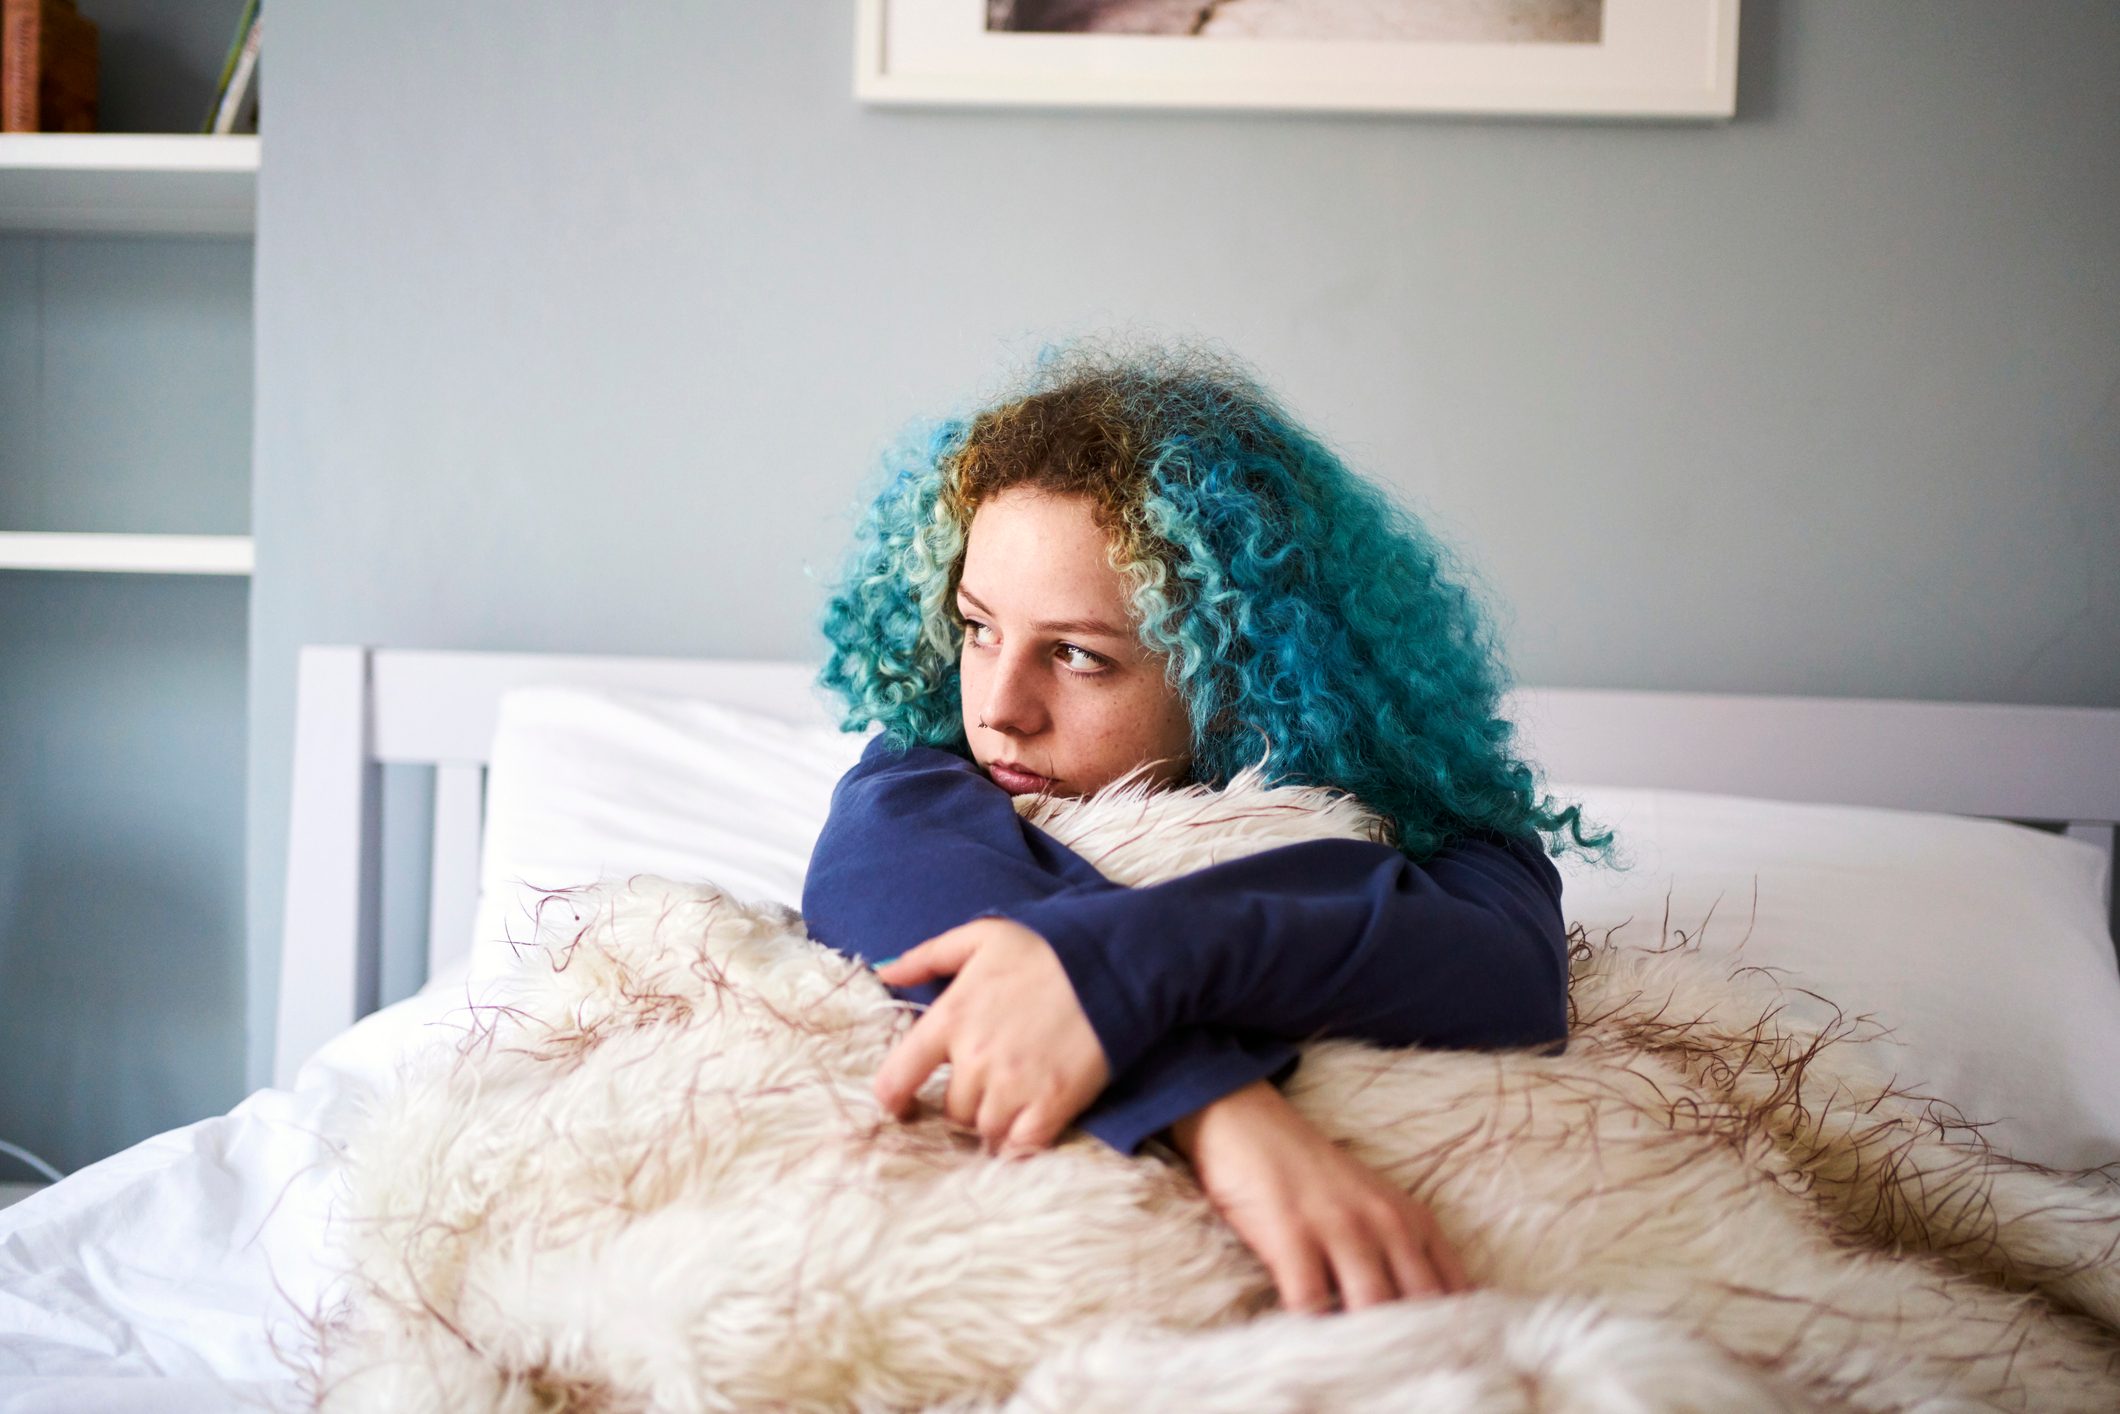 Young woman looking sad depressed and alone in bed